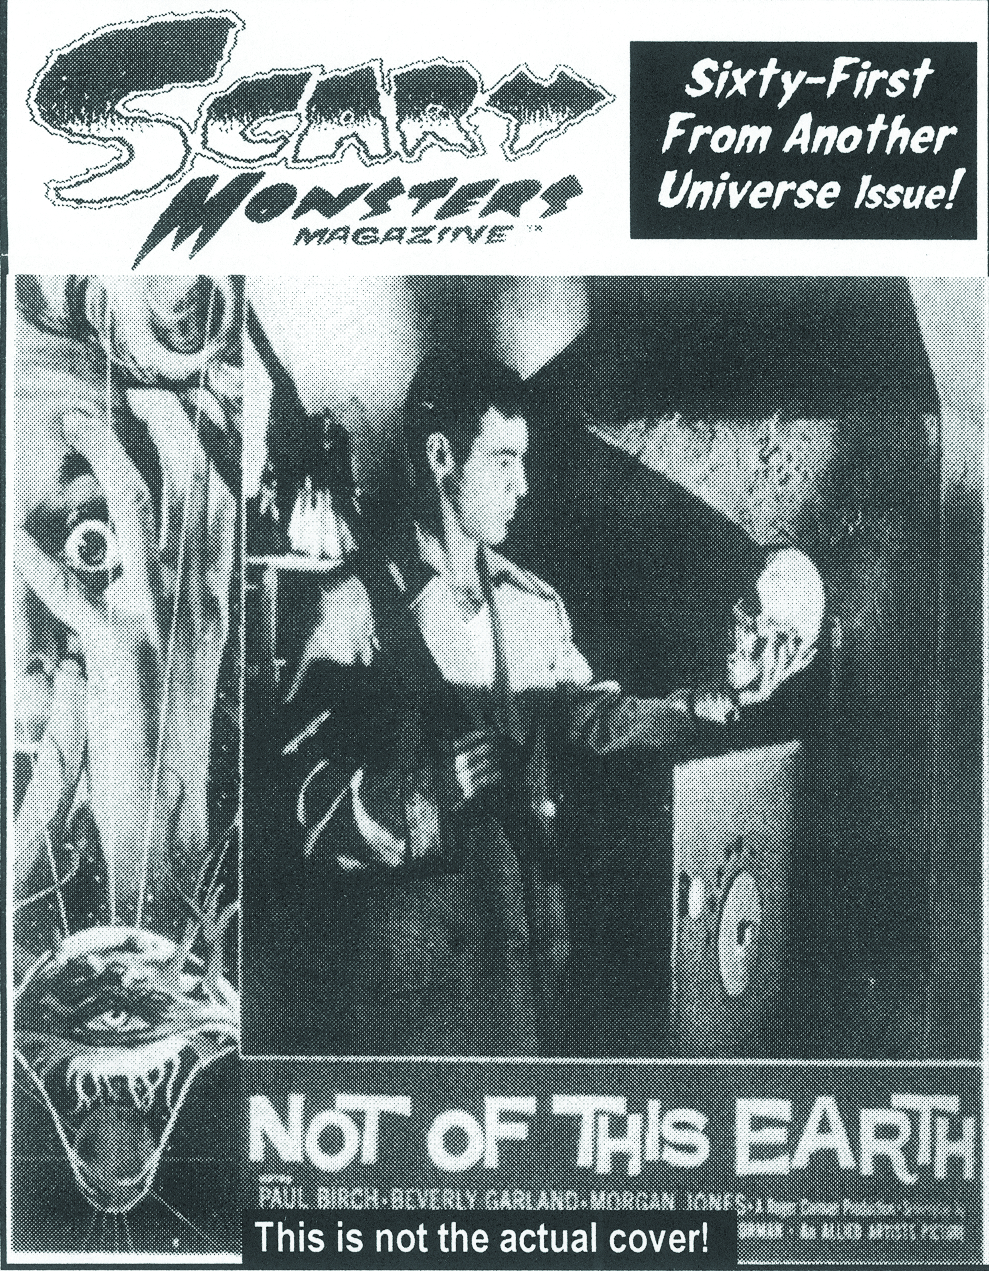 SCARY MONSTERS MAGAZINE #61